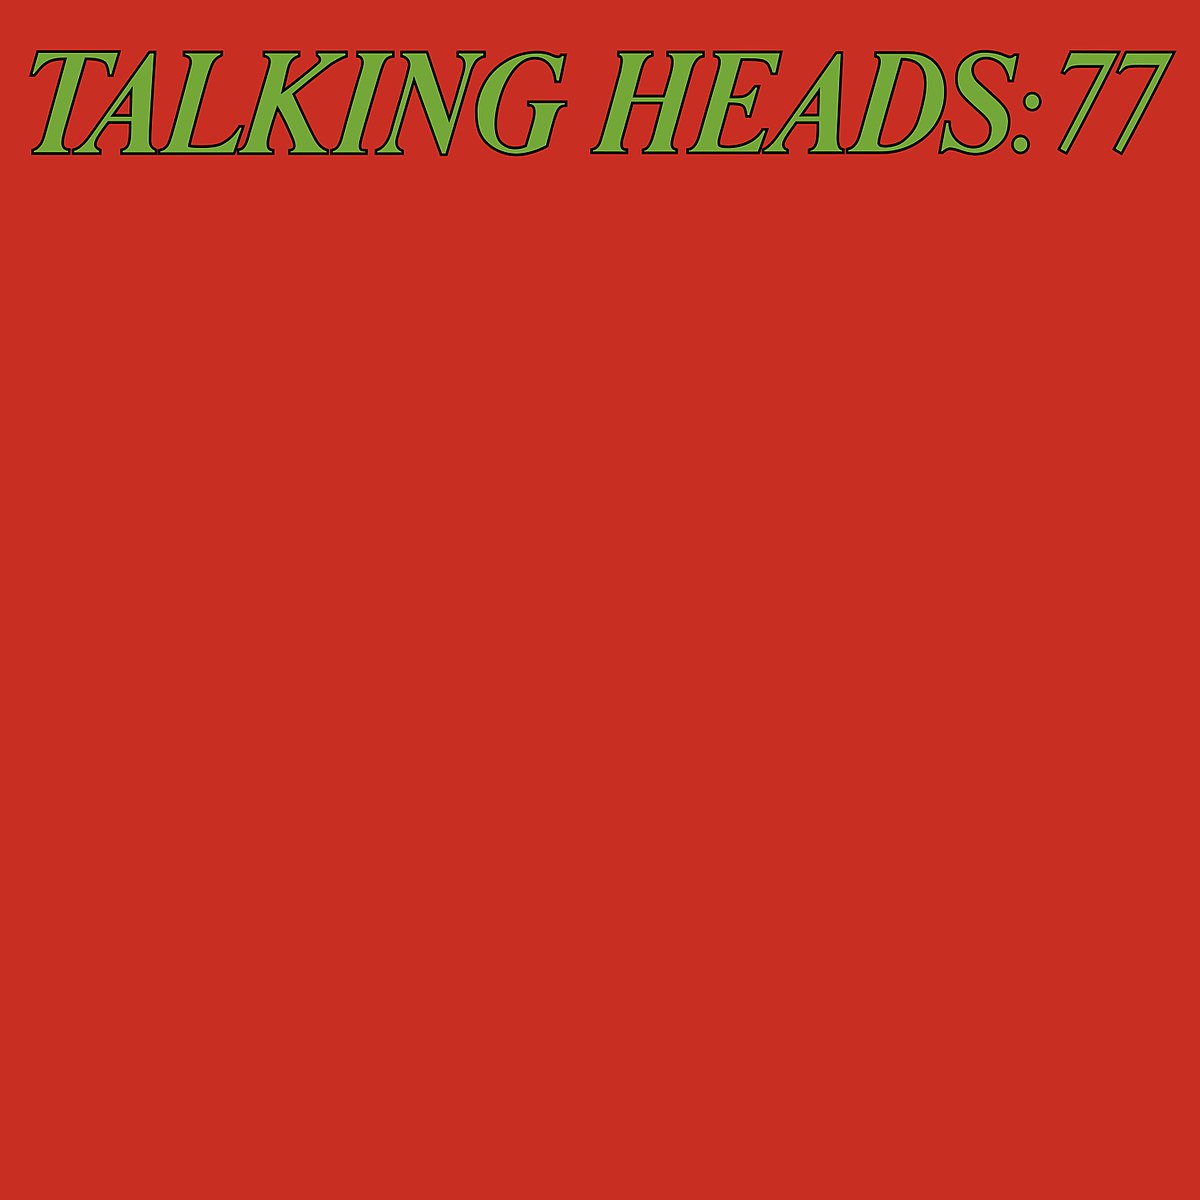 Classic Rock Covers Database Talking Heads Talking Heads 77 1977